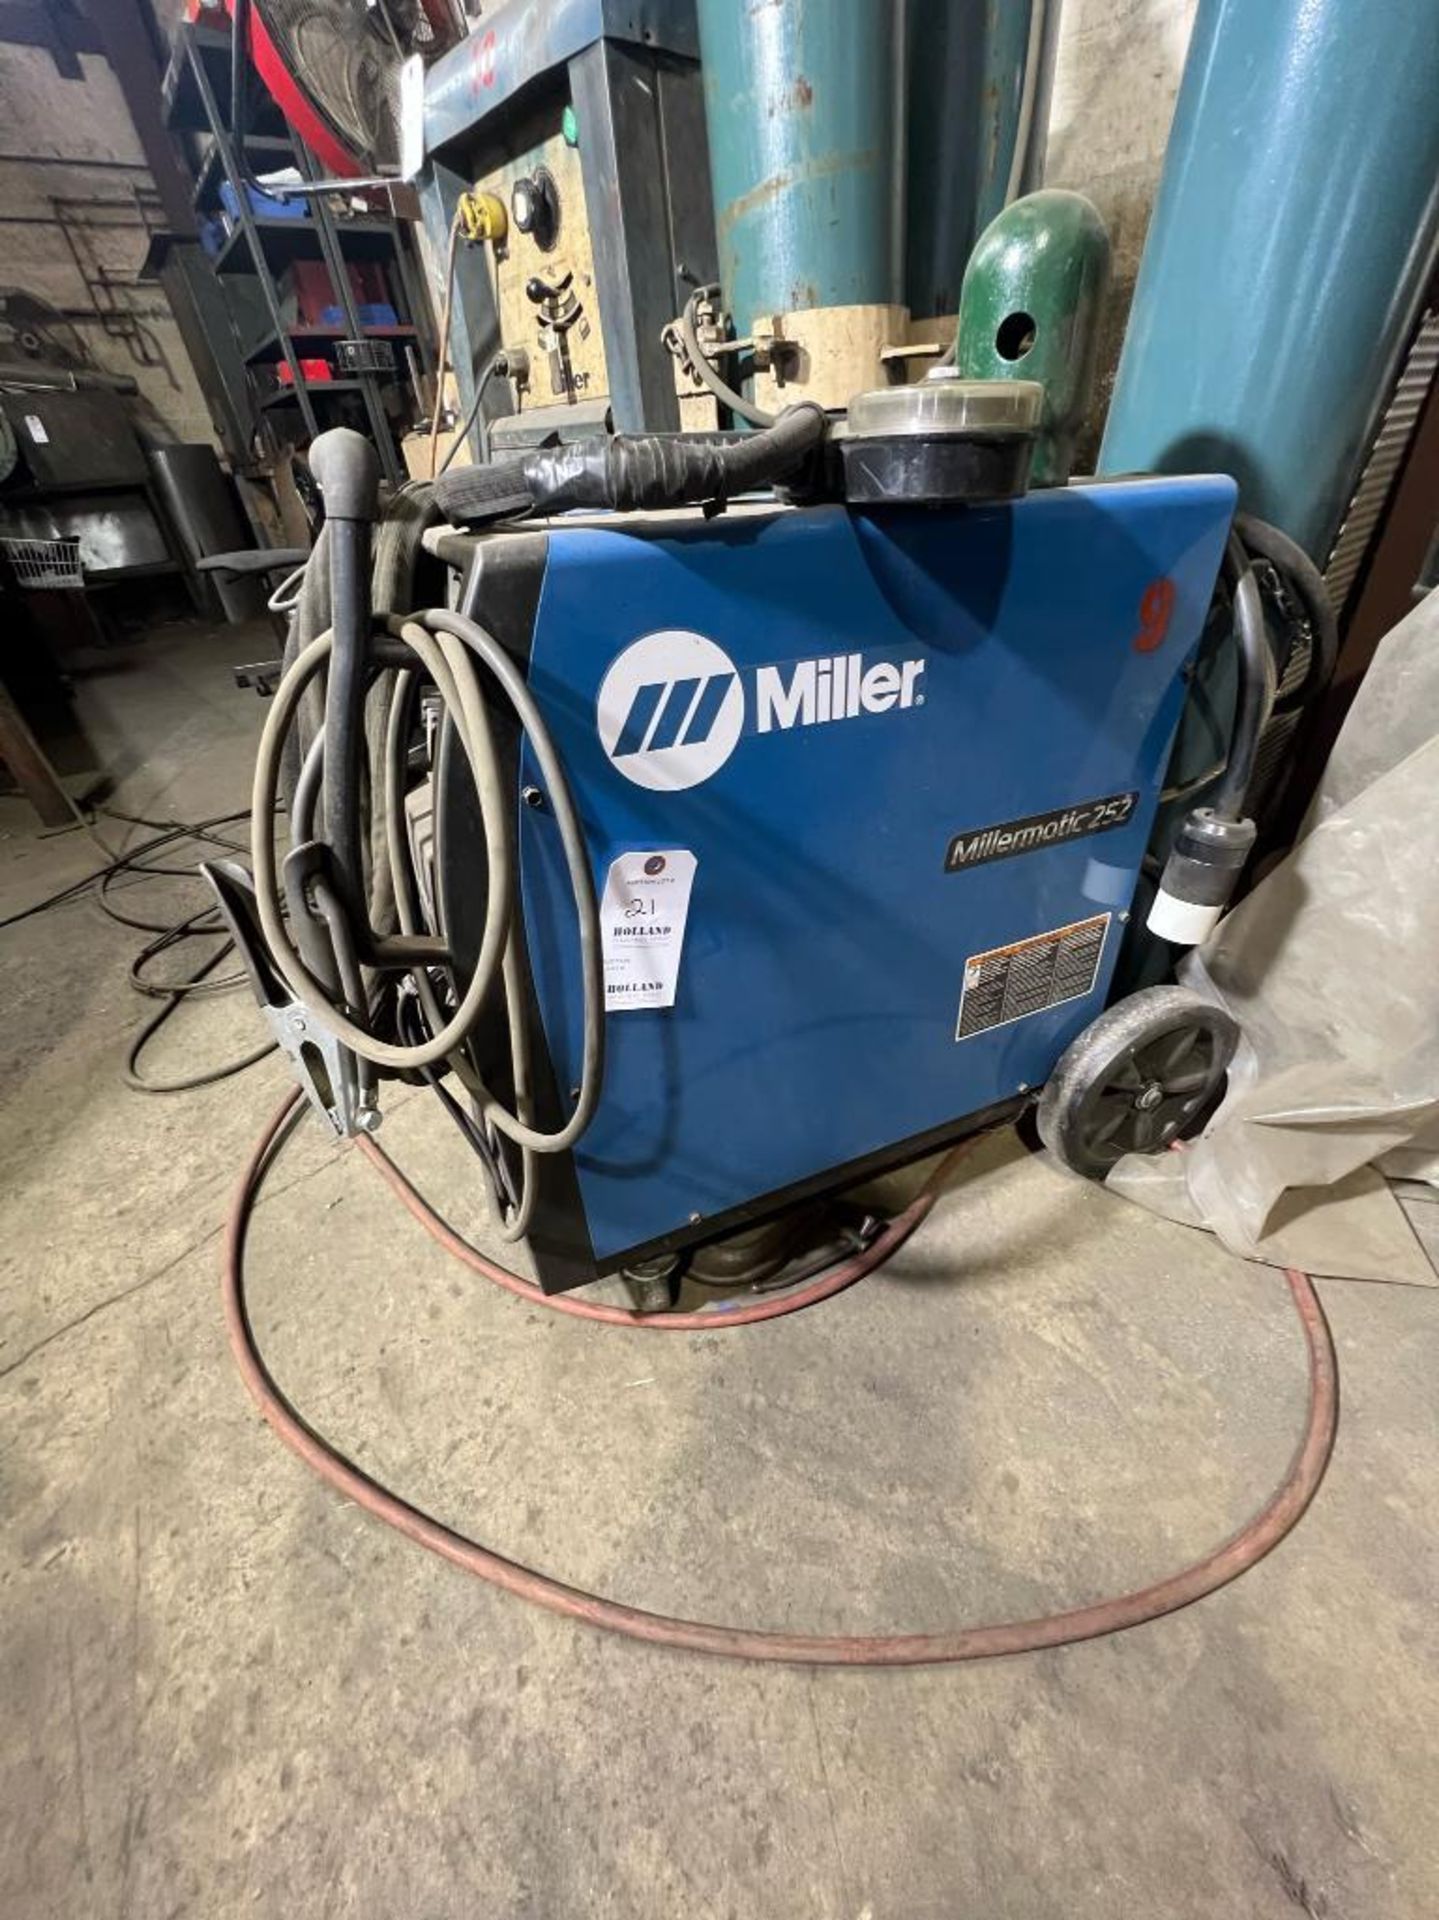 MillerMatic 252 Wire Feed Welder with spoolmatic 30A Aluminum Welding Gun, Bottles Not Included